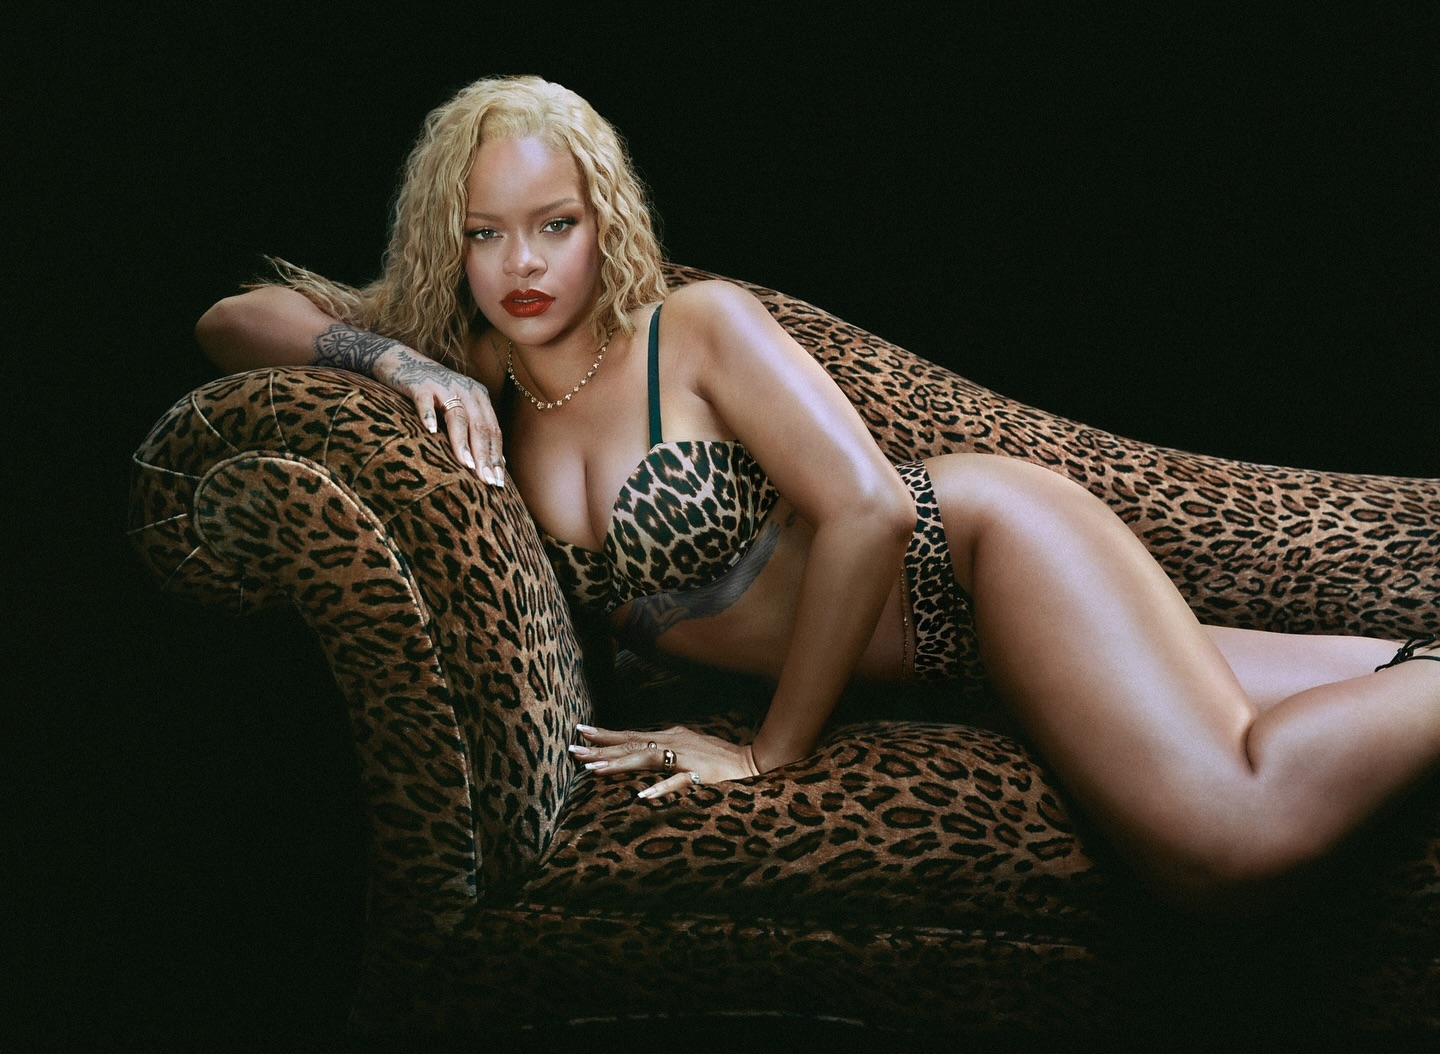 Rihanna sporting a matching leopard print bra and underwear for her new Soft N' Savage collection